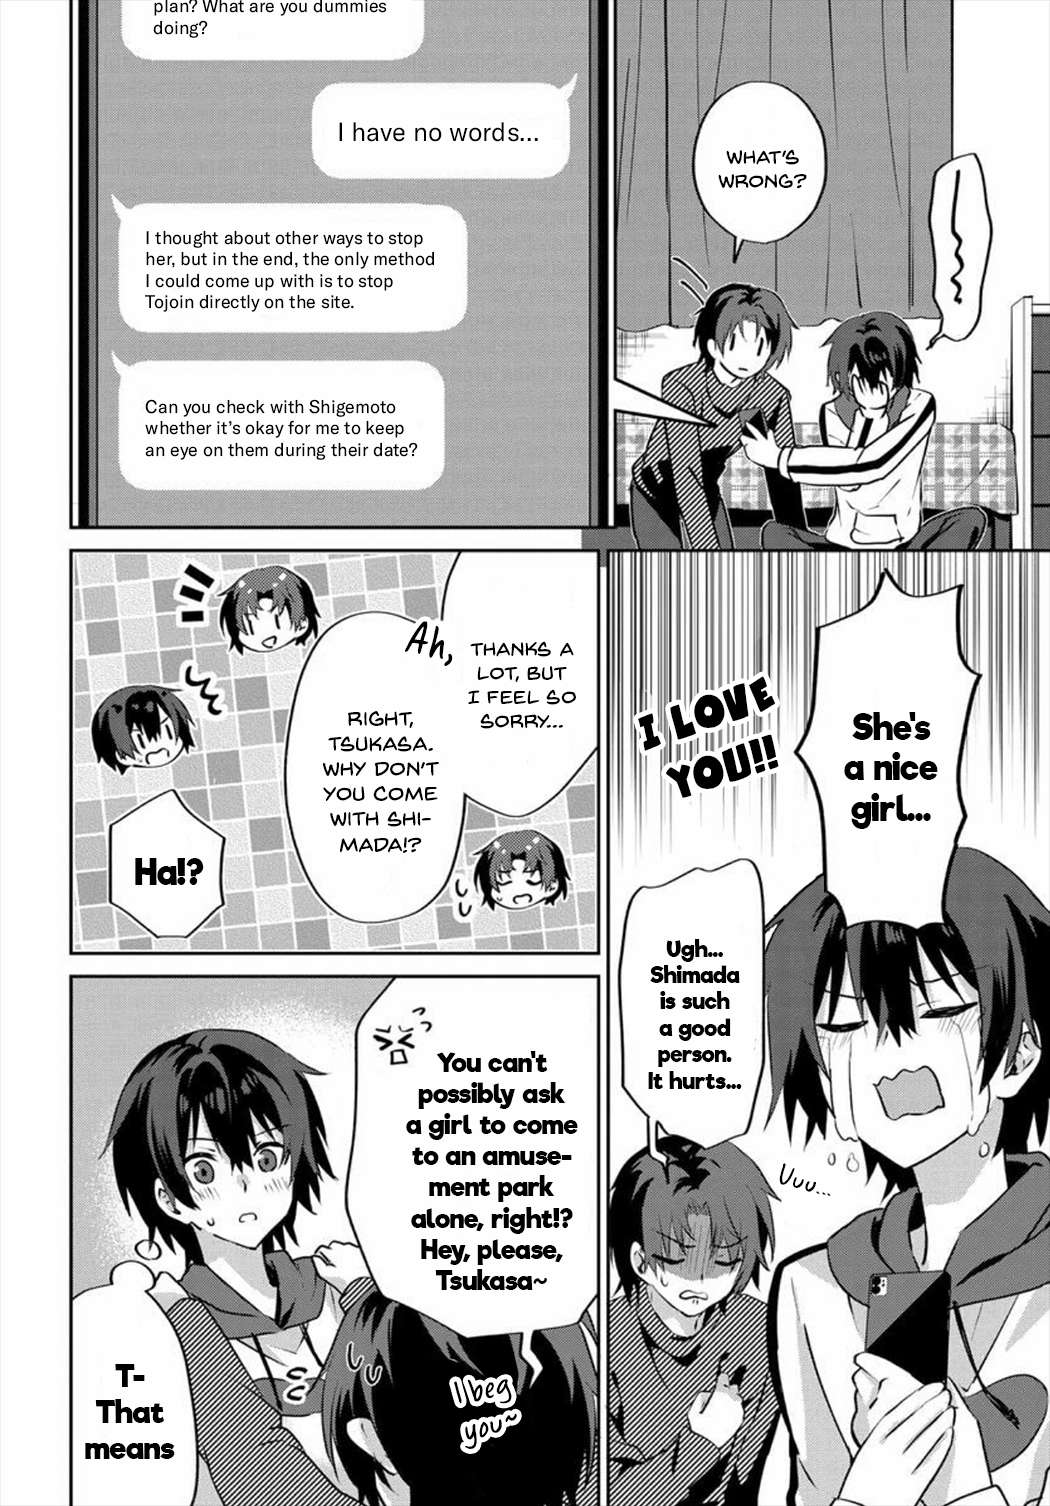 Since I’Ve Entered The World Of Romantic Comedy Manga, I’Ll Do My Best To Make The Losing Heroine Happy - chapter 6.1 - #6